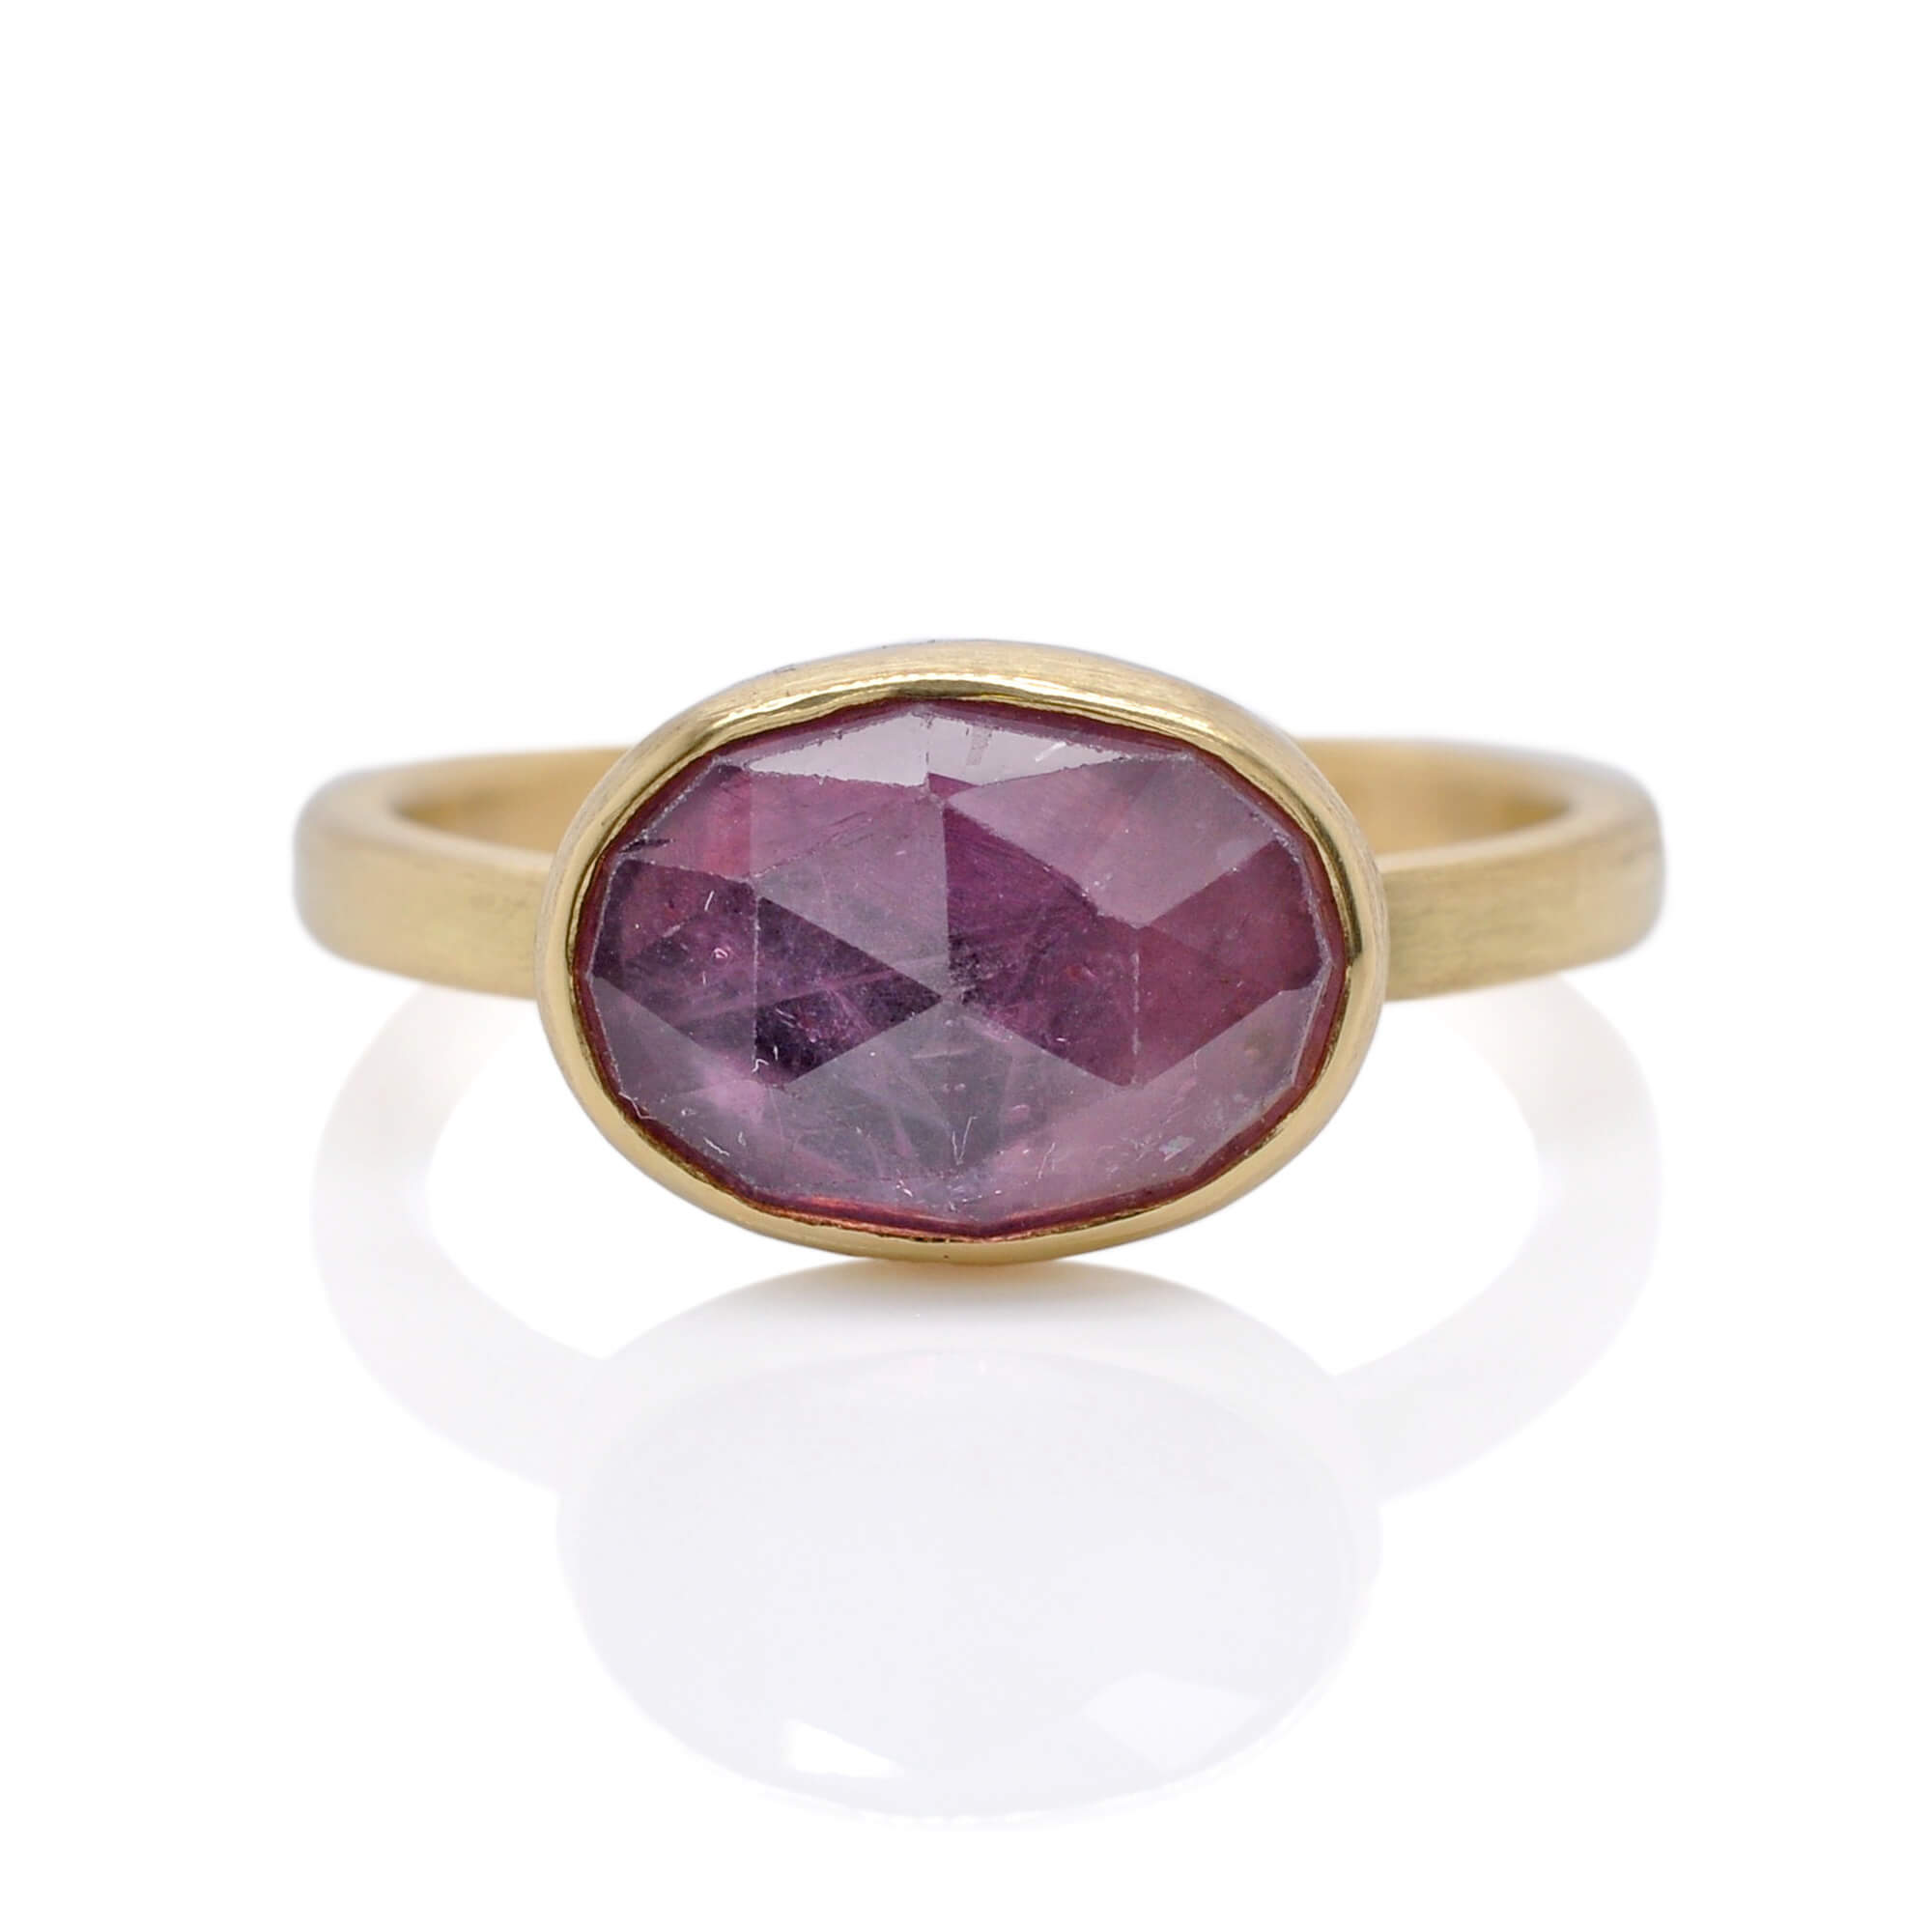 Pink rose cut sapphire ring in yellow gold. Handmade by EC Design Jewelry in Minneapolis, MN.